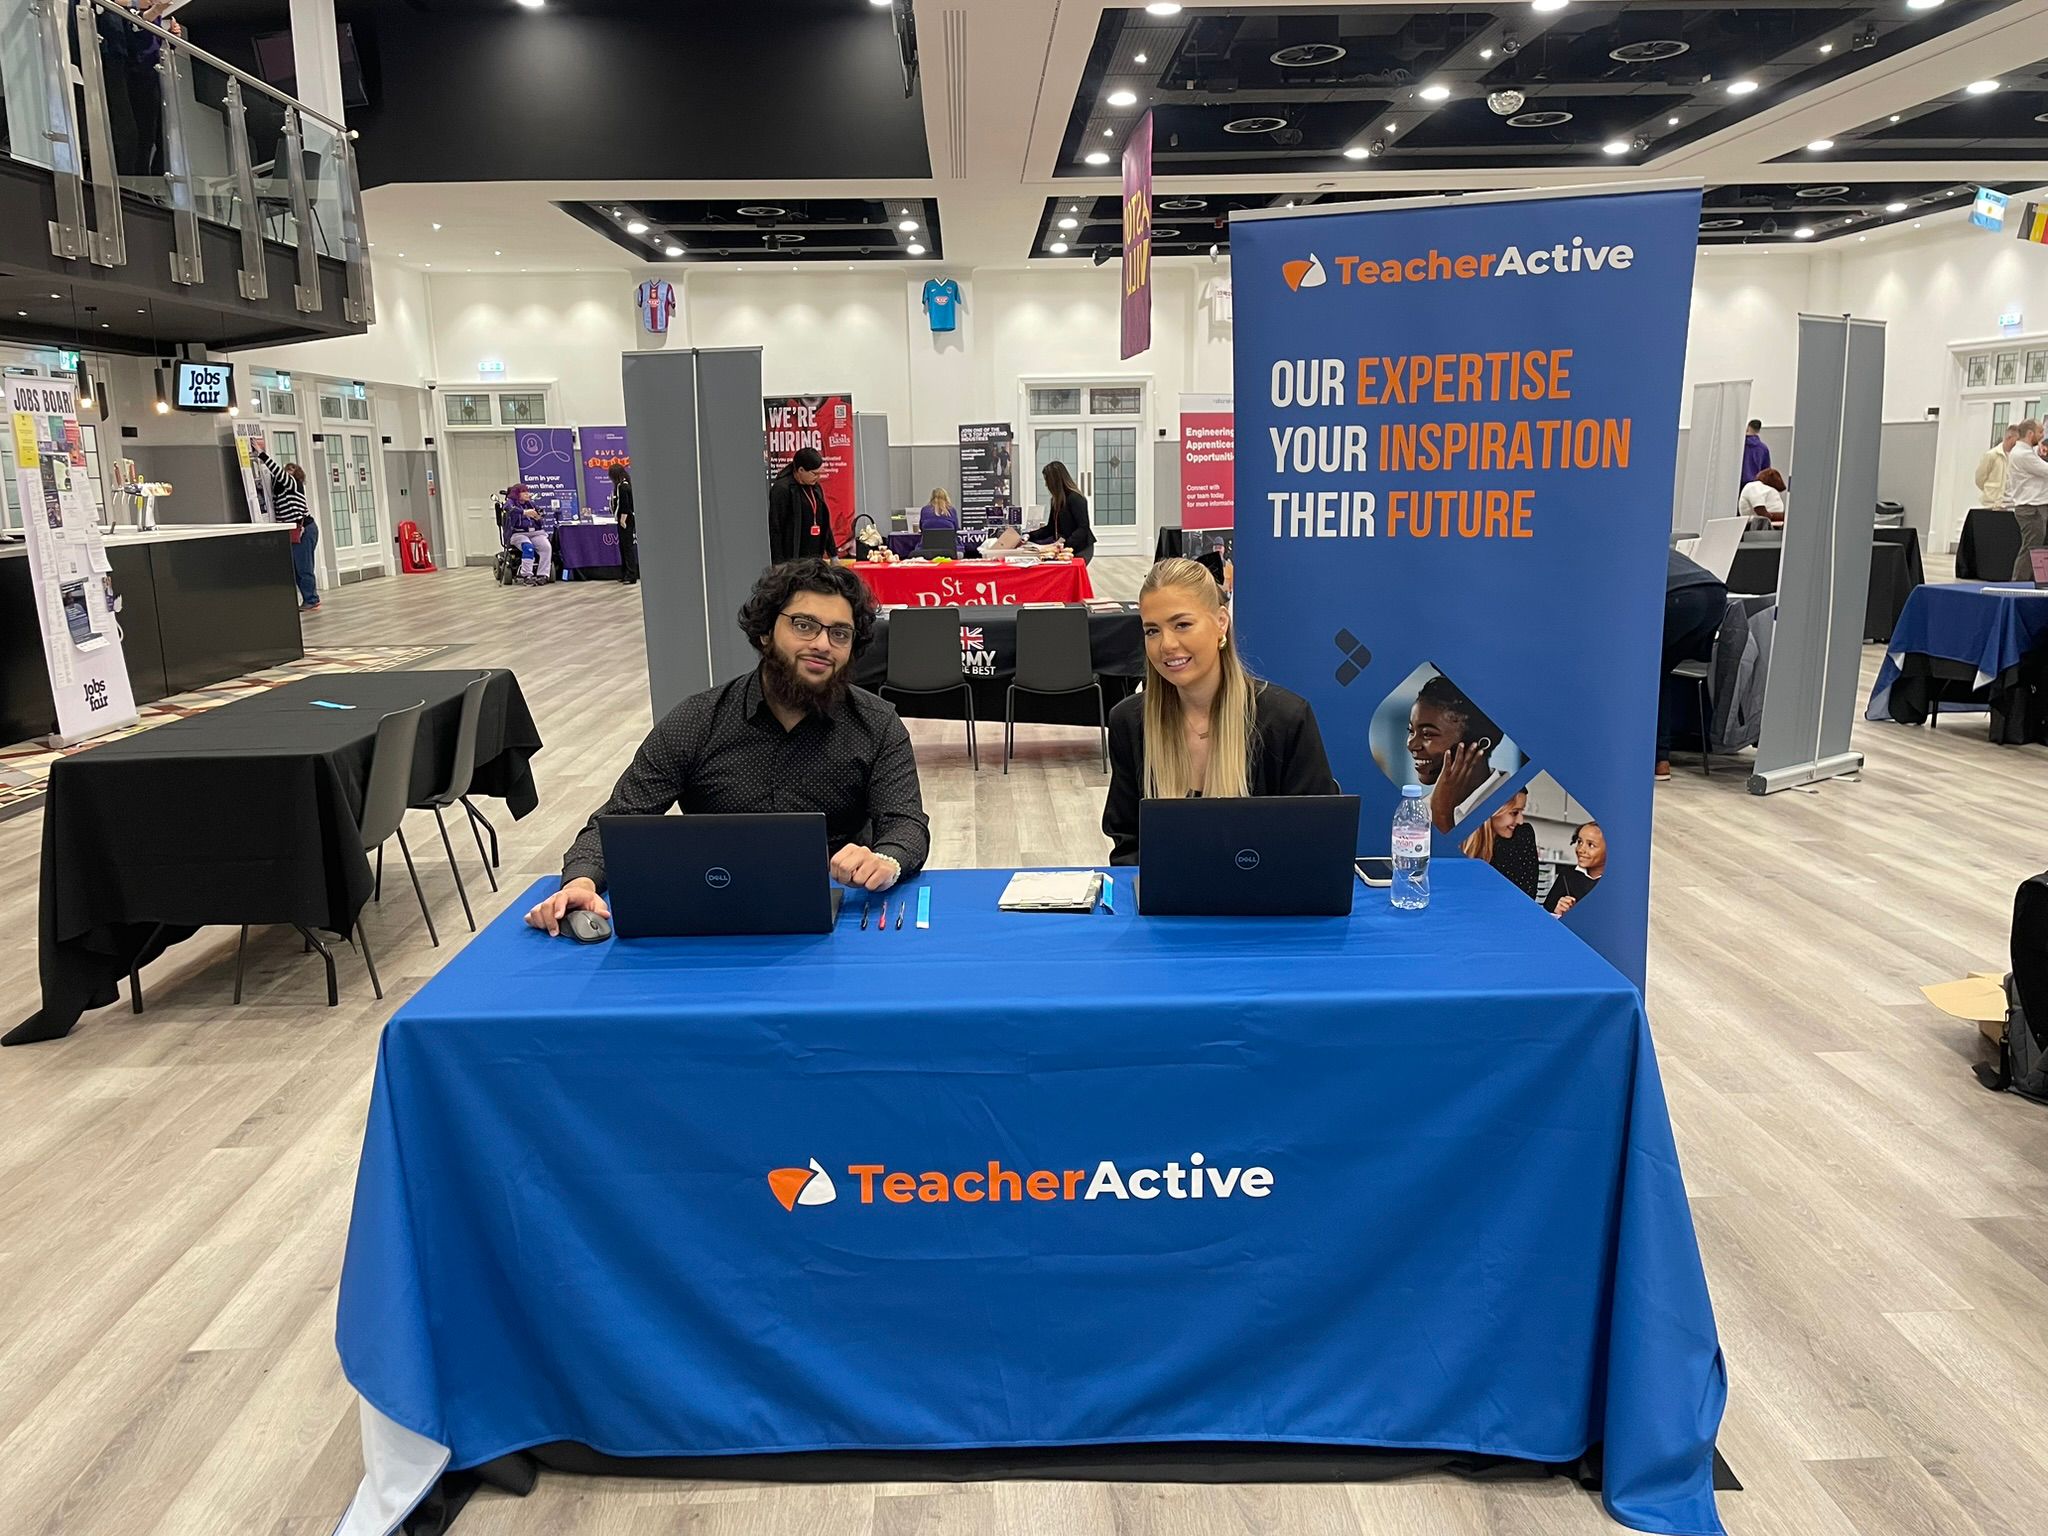 Teacher Active at our event in Birmingham